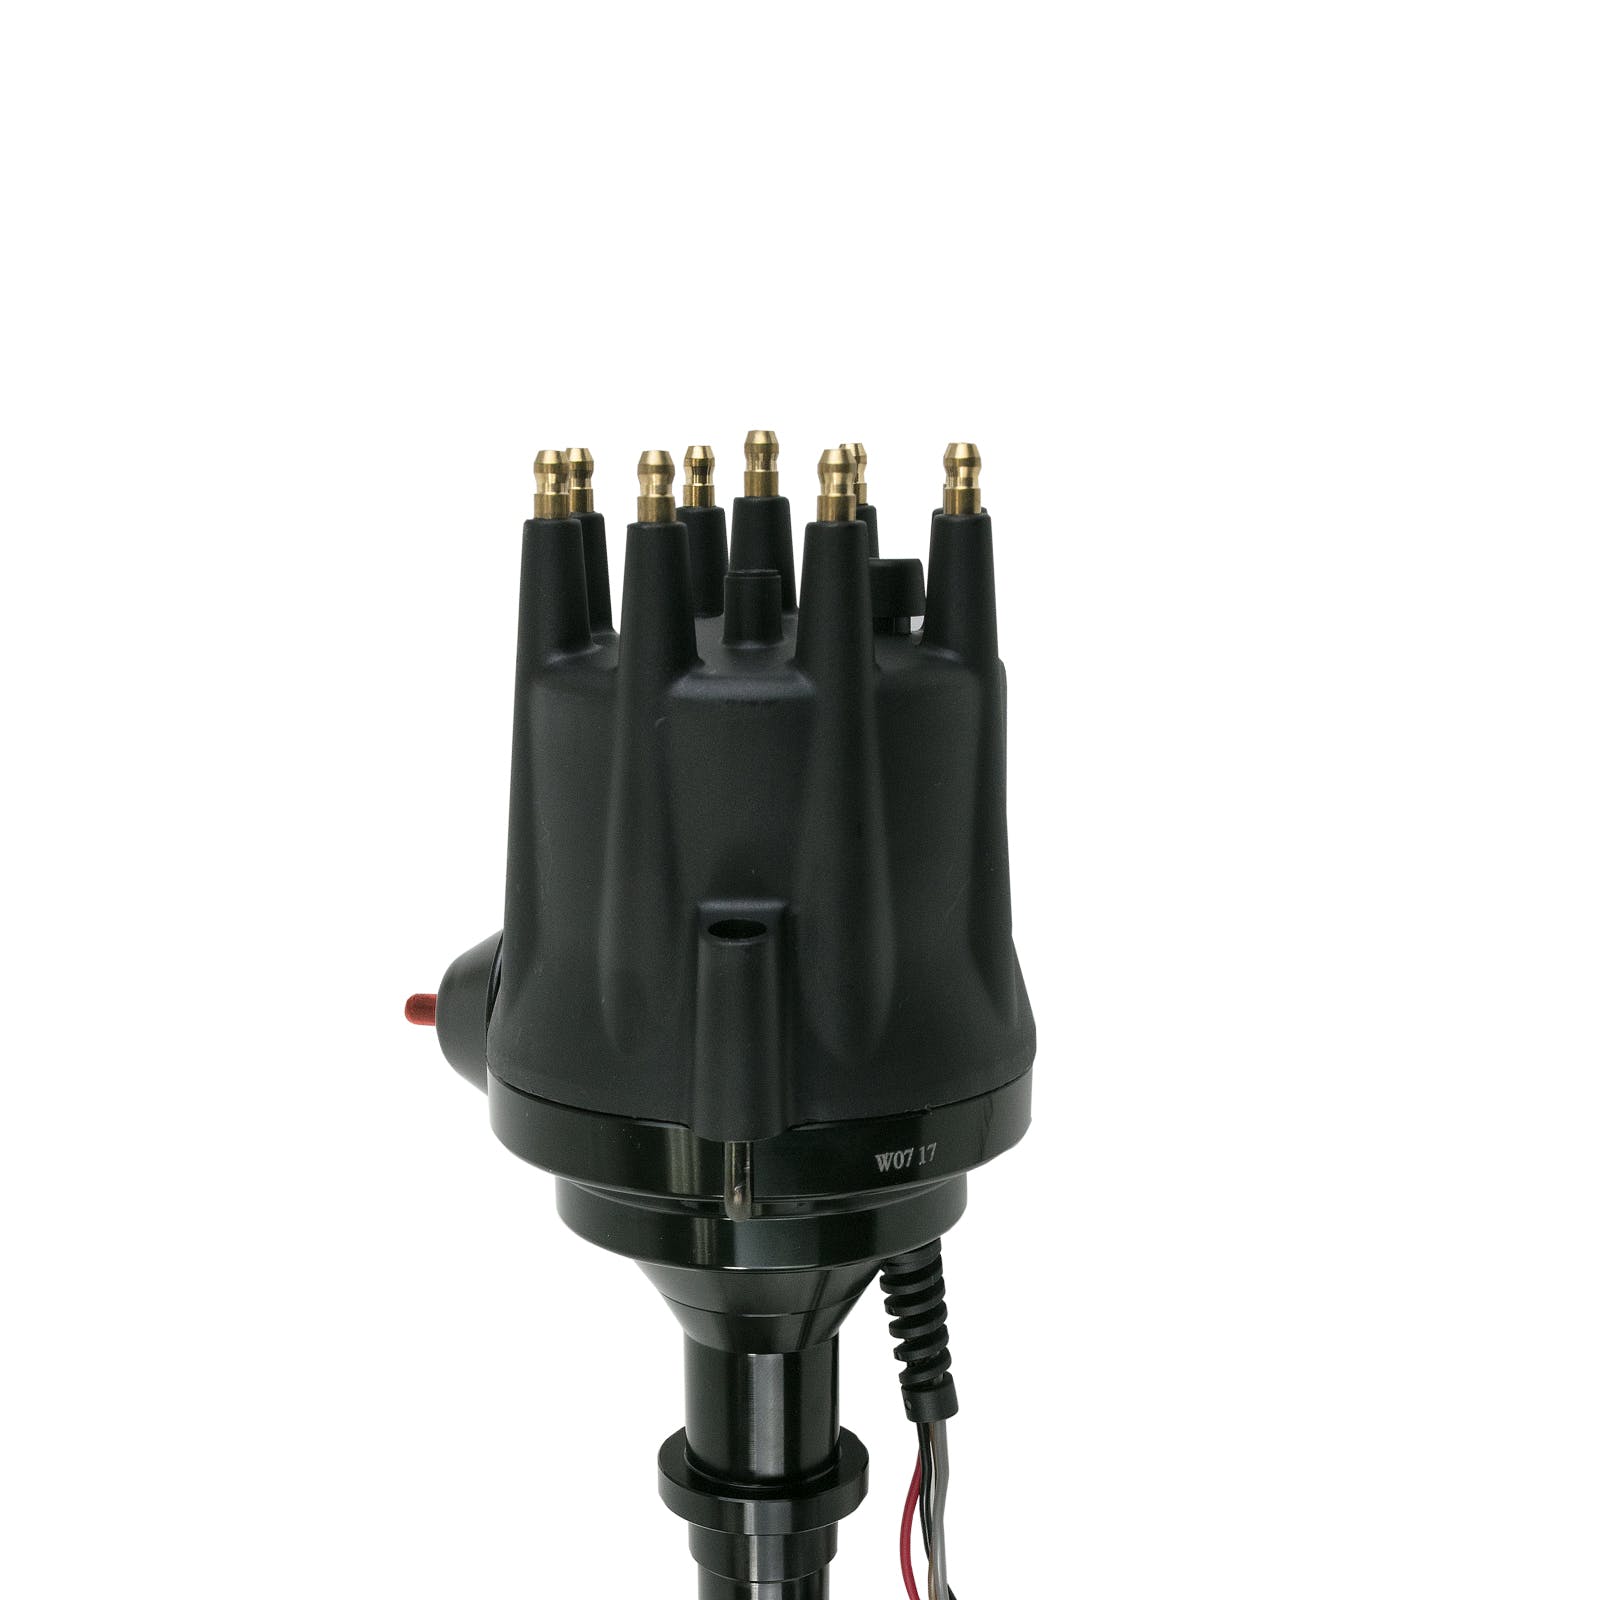 Top Street Performance JM7701-2ABK Pro Series Ready to Run Distributor Black Cap with Fixed Collar, All Black